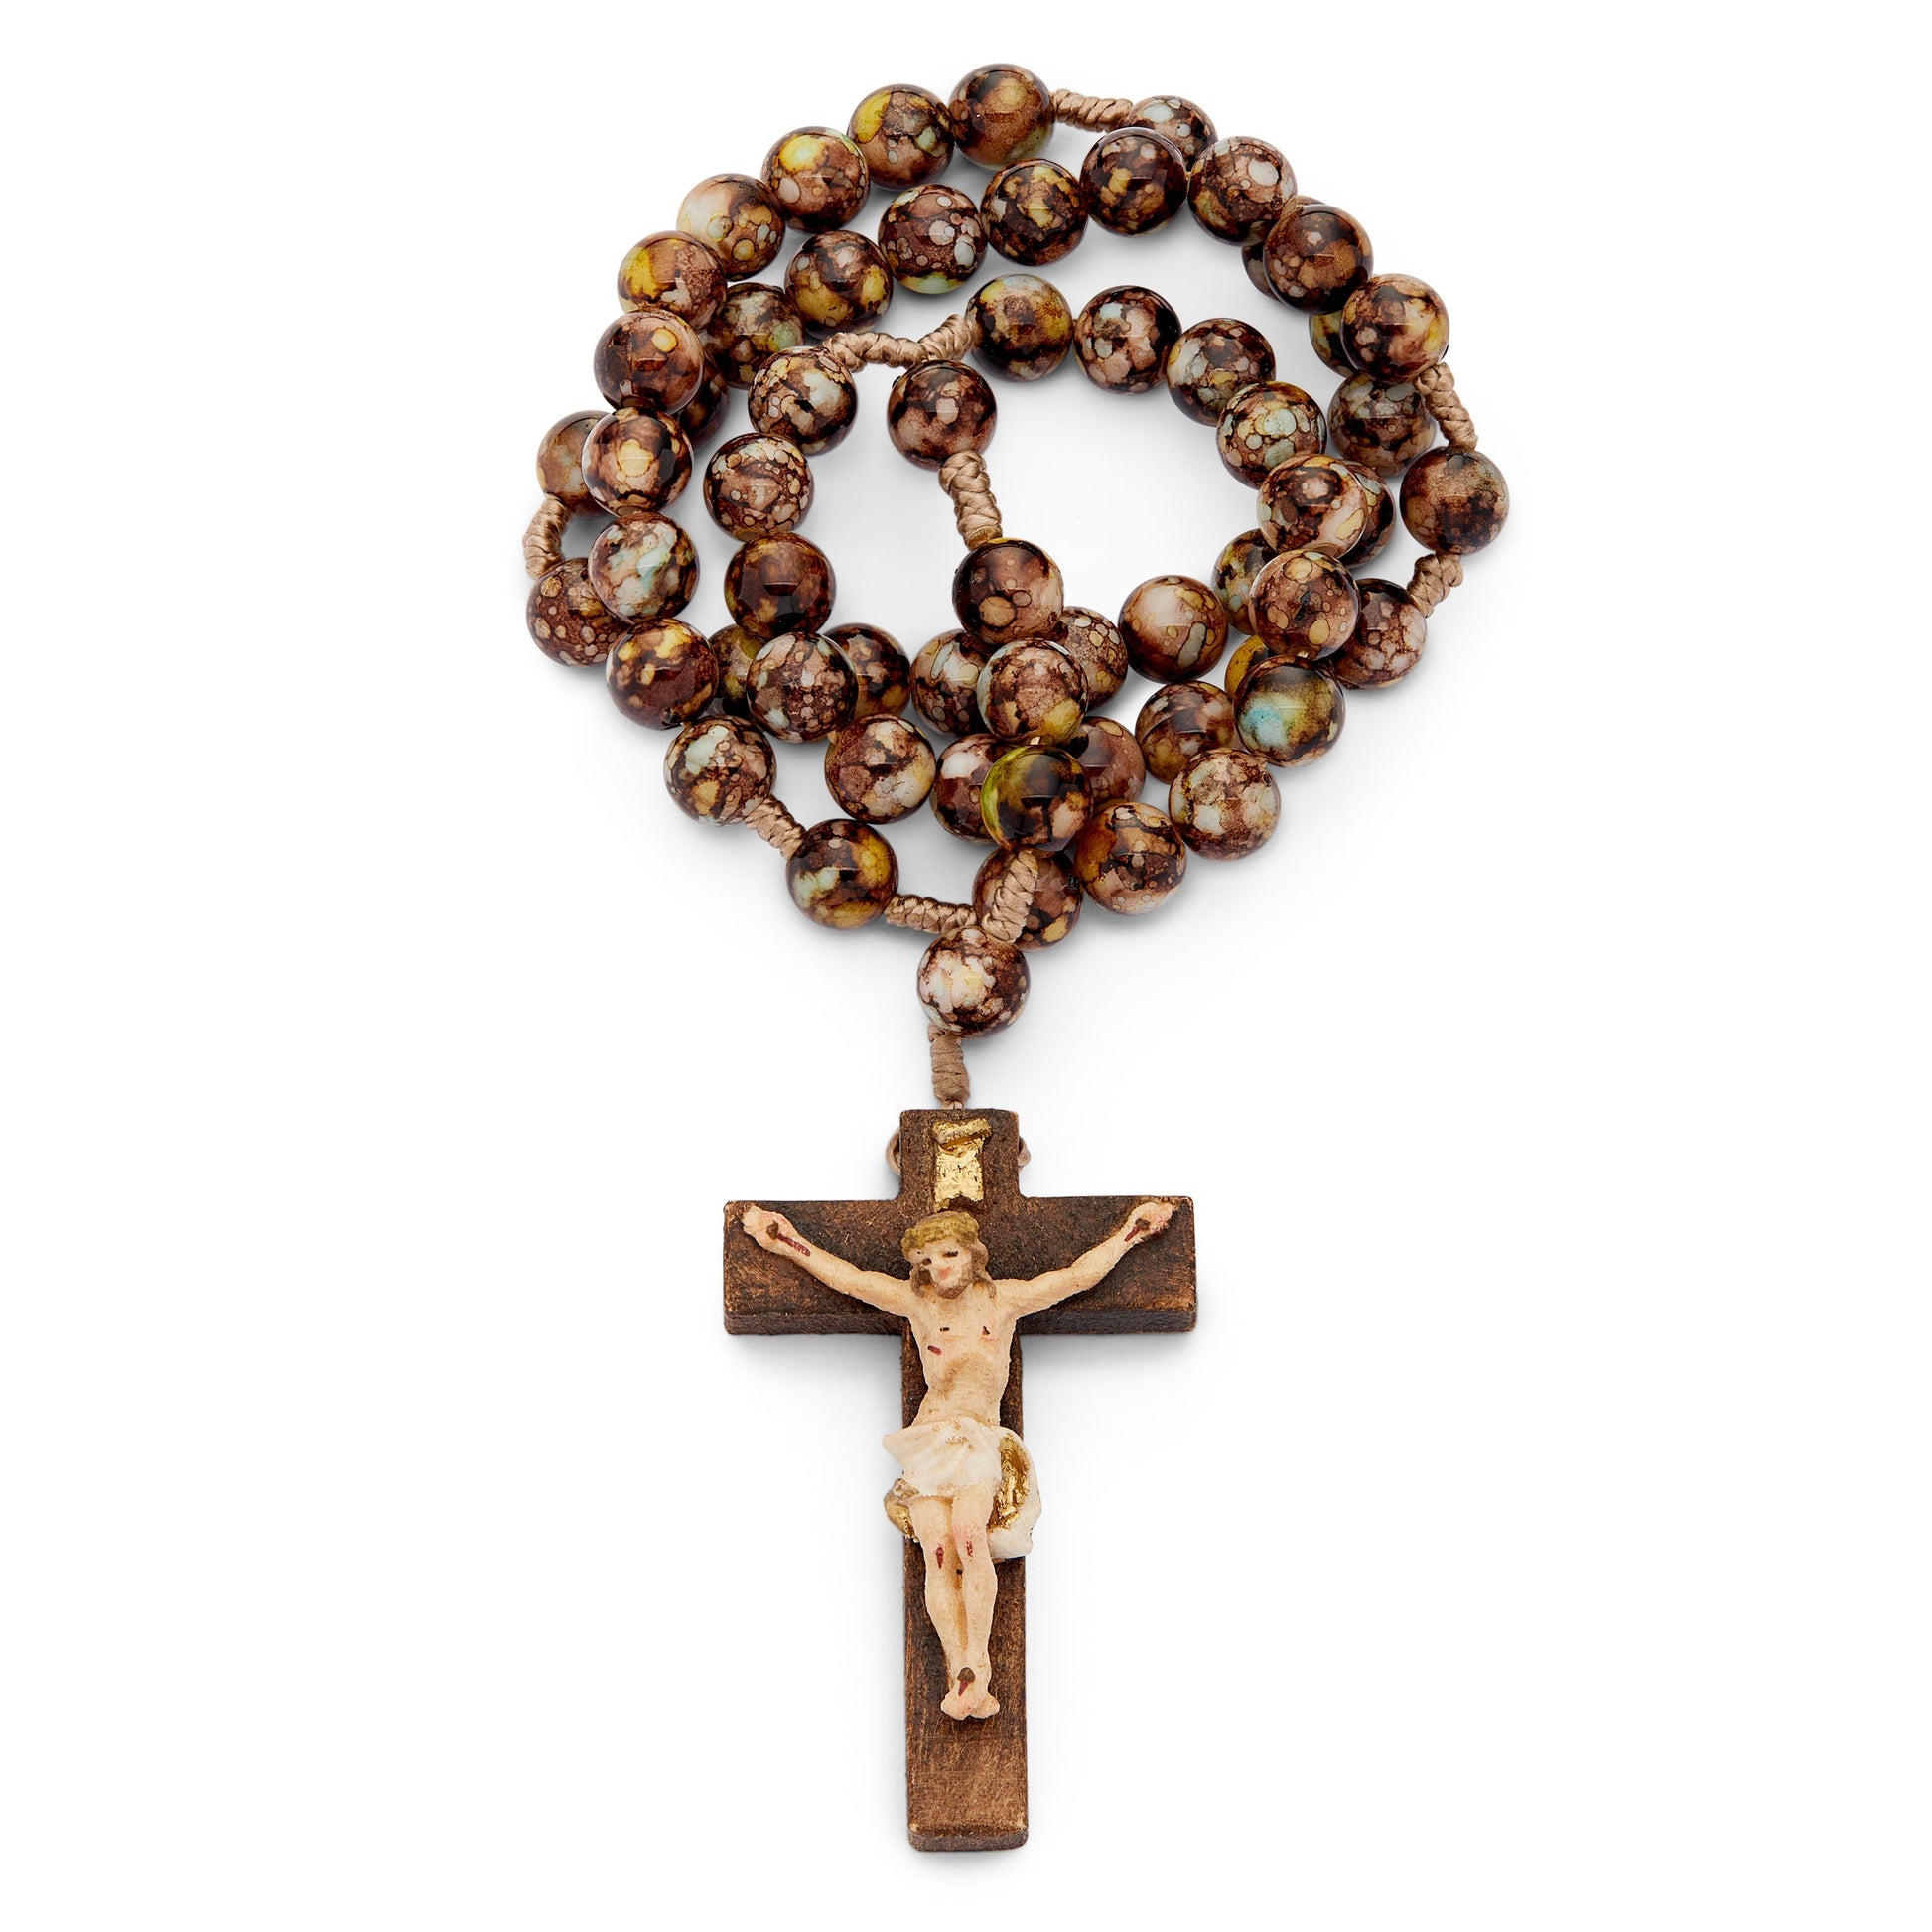 MONDO CATTOLICO Prayer Beads 35.5 cm (13.97 in) / 7 mm (0.27 in) Resin Rosary in Rope with Handpainted Crucifix